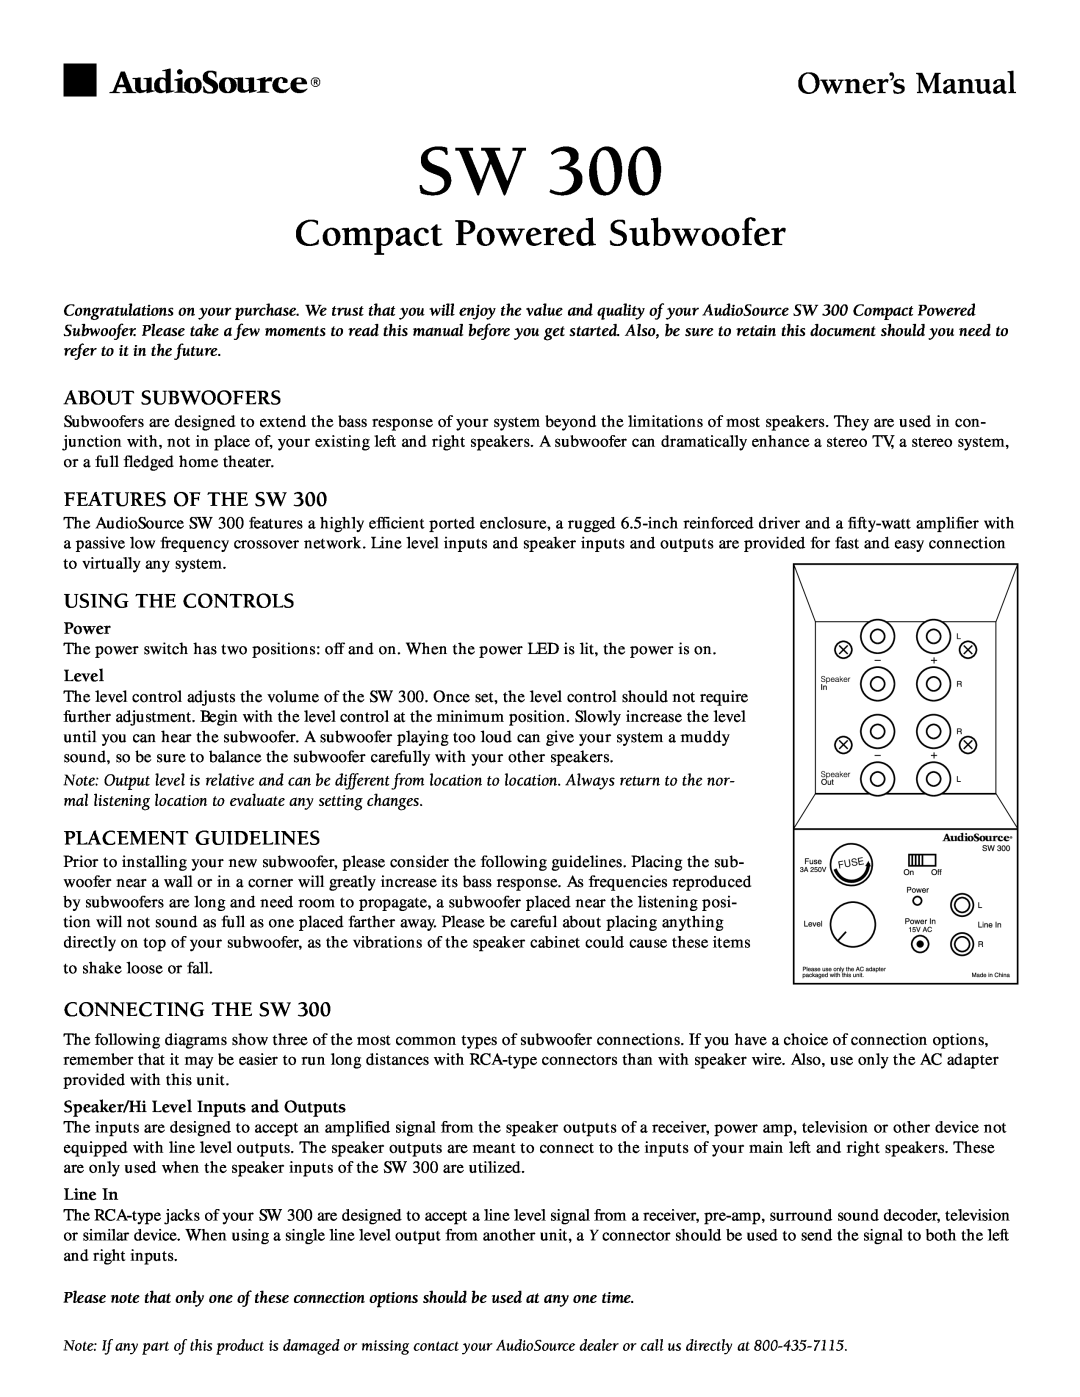 AudioSource Compact Powered Subwoofer, SW 300 owner manual About Subwoofers, Features Of The Sw, Using The Controls, Level 